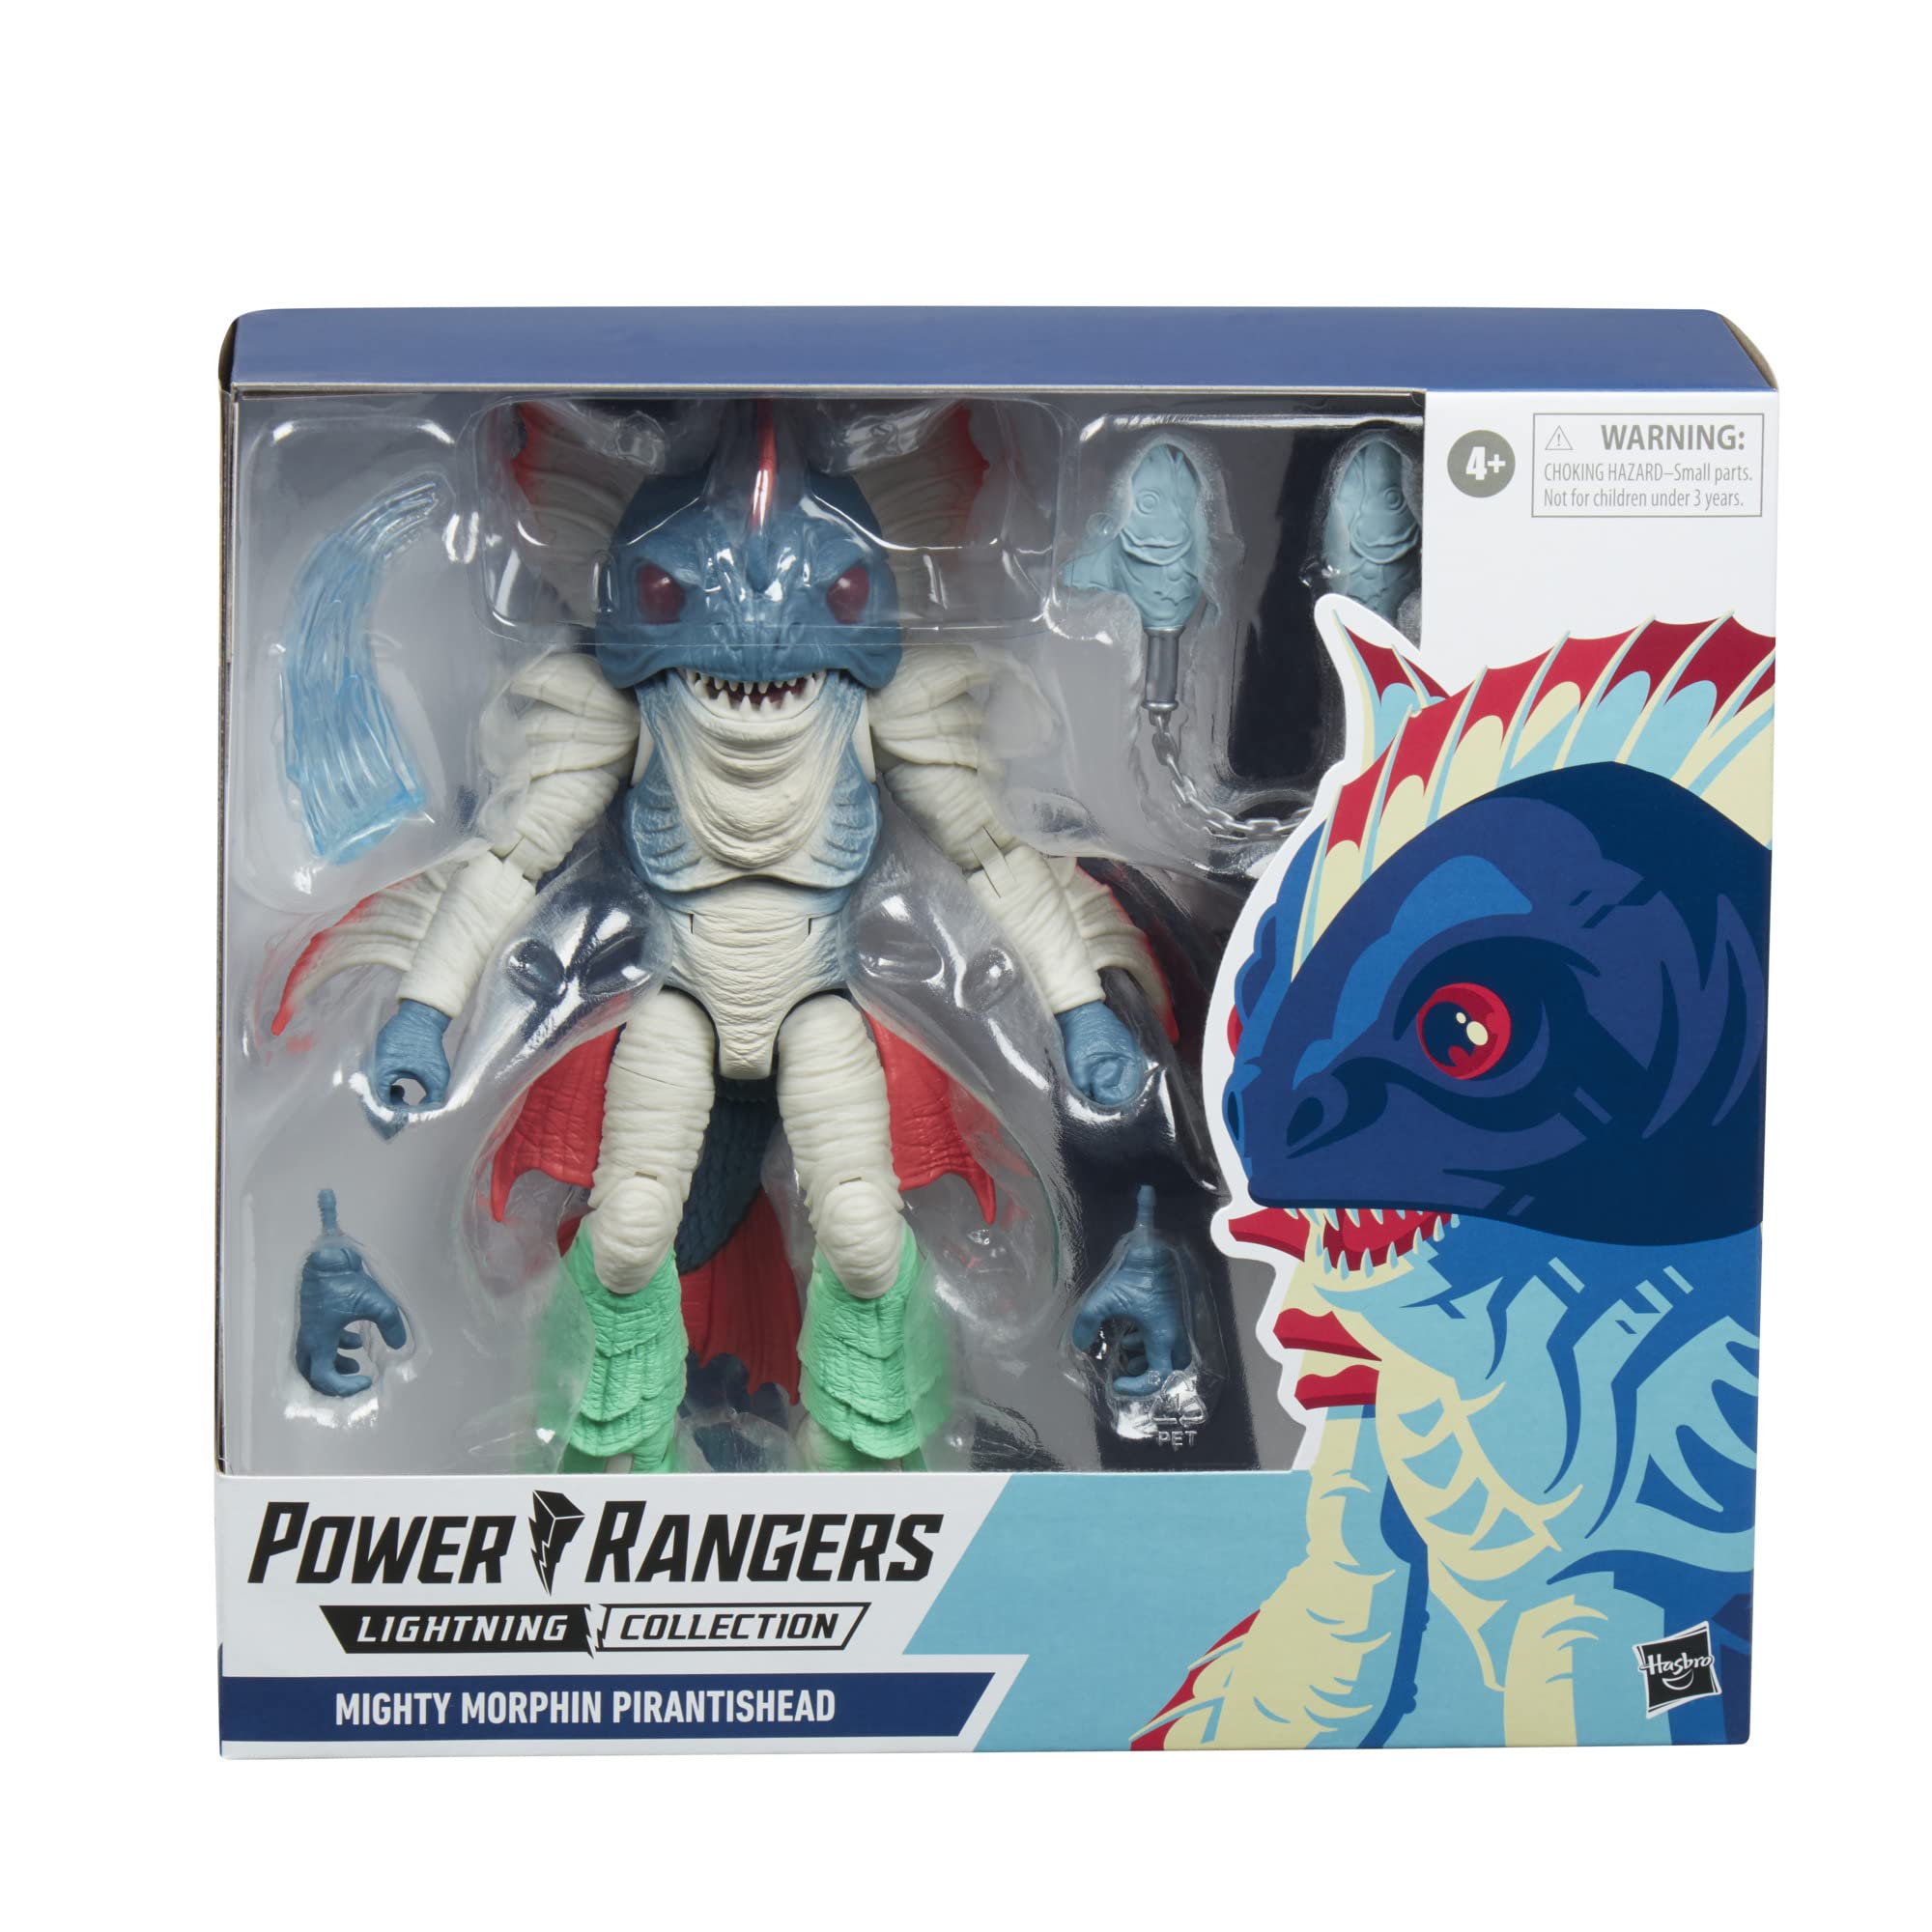 Power Rangers Lightning Collection Mighty Morphin Pirantishead 7-Inch Premium Collectible Action Figure Toy with Accessories, Kids 4 and Up